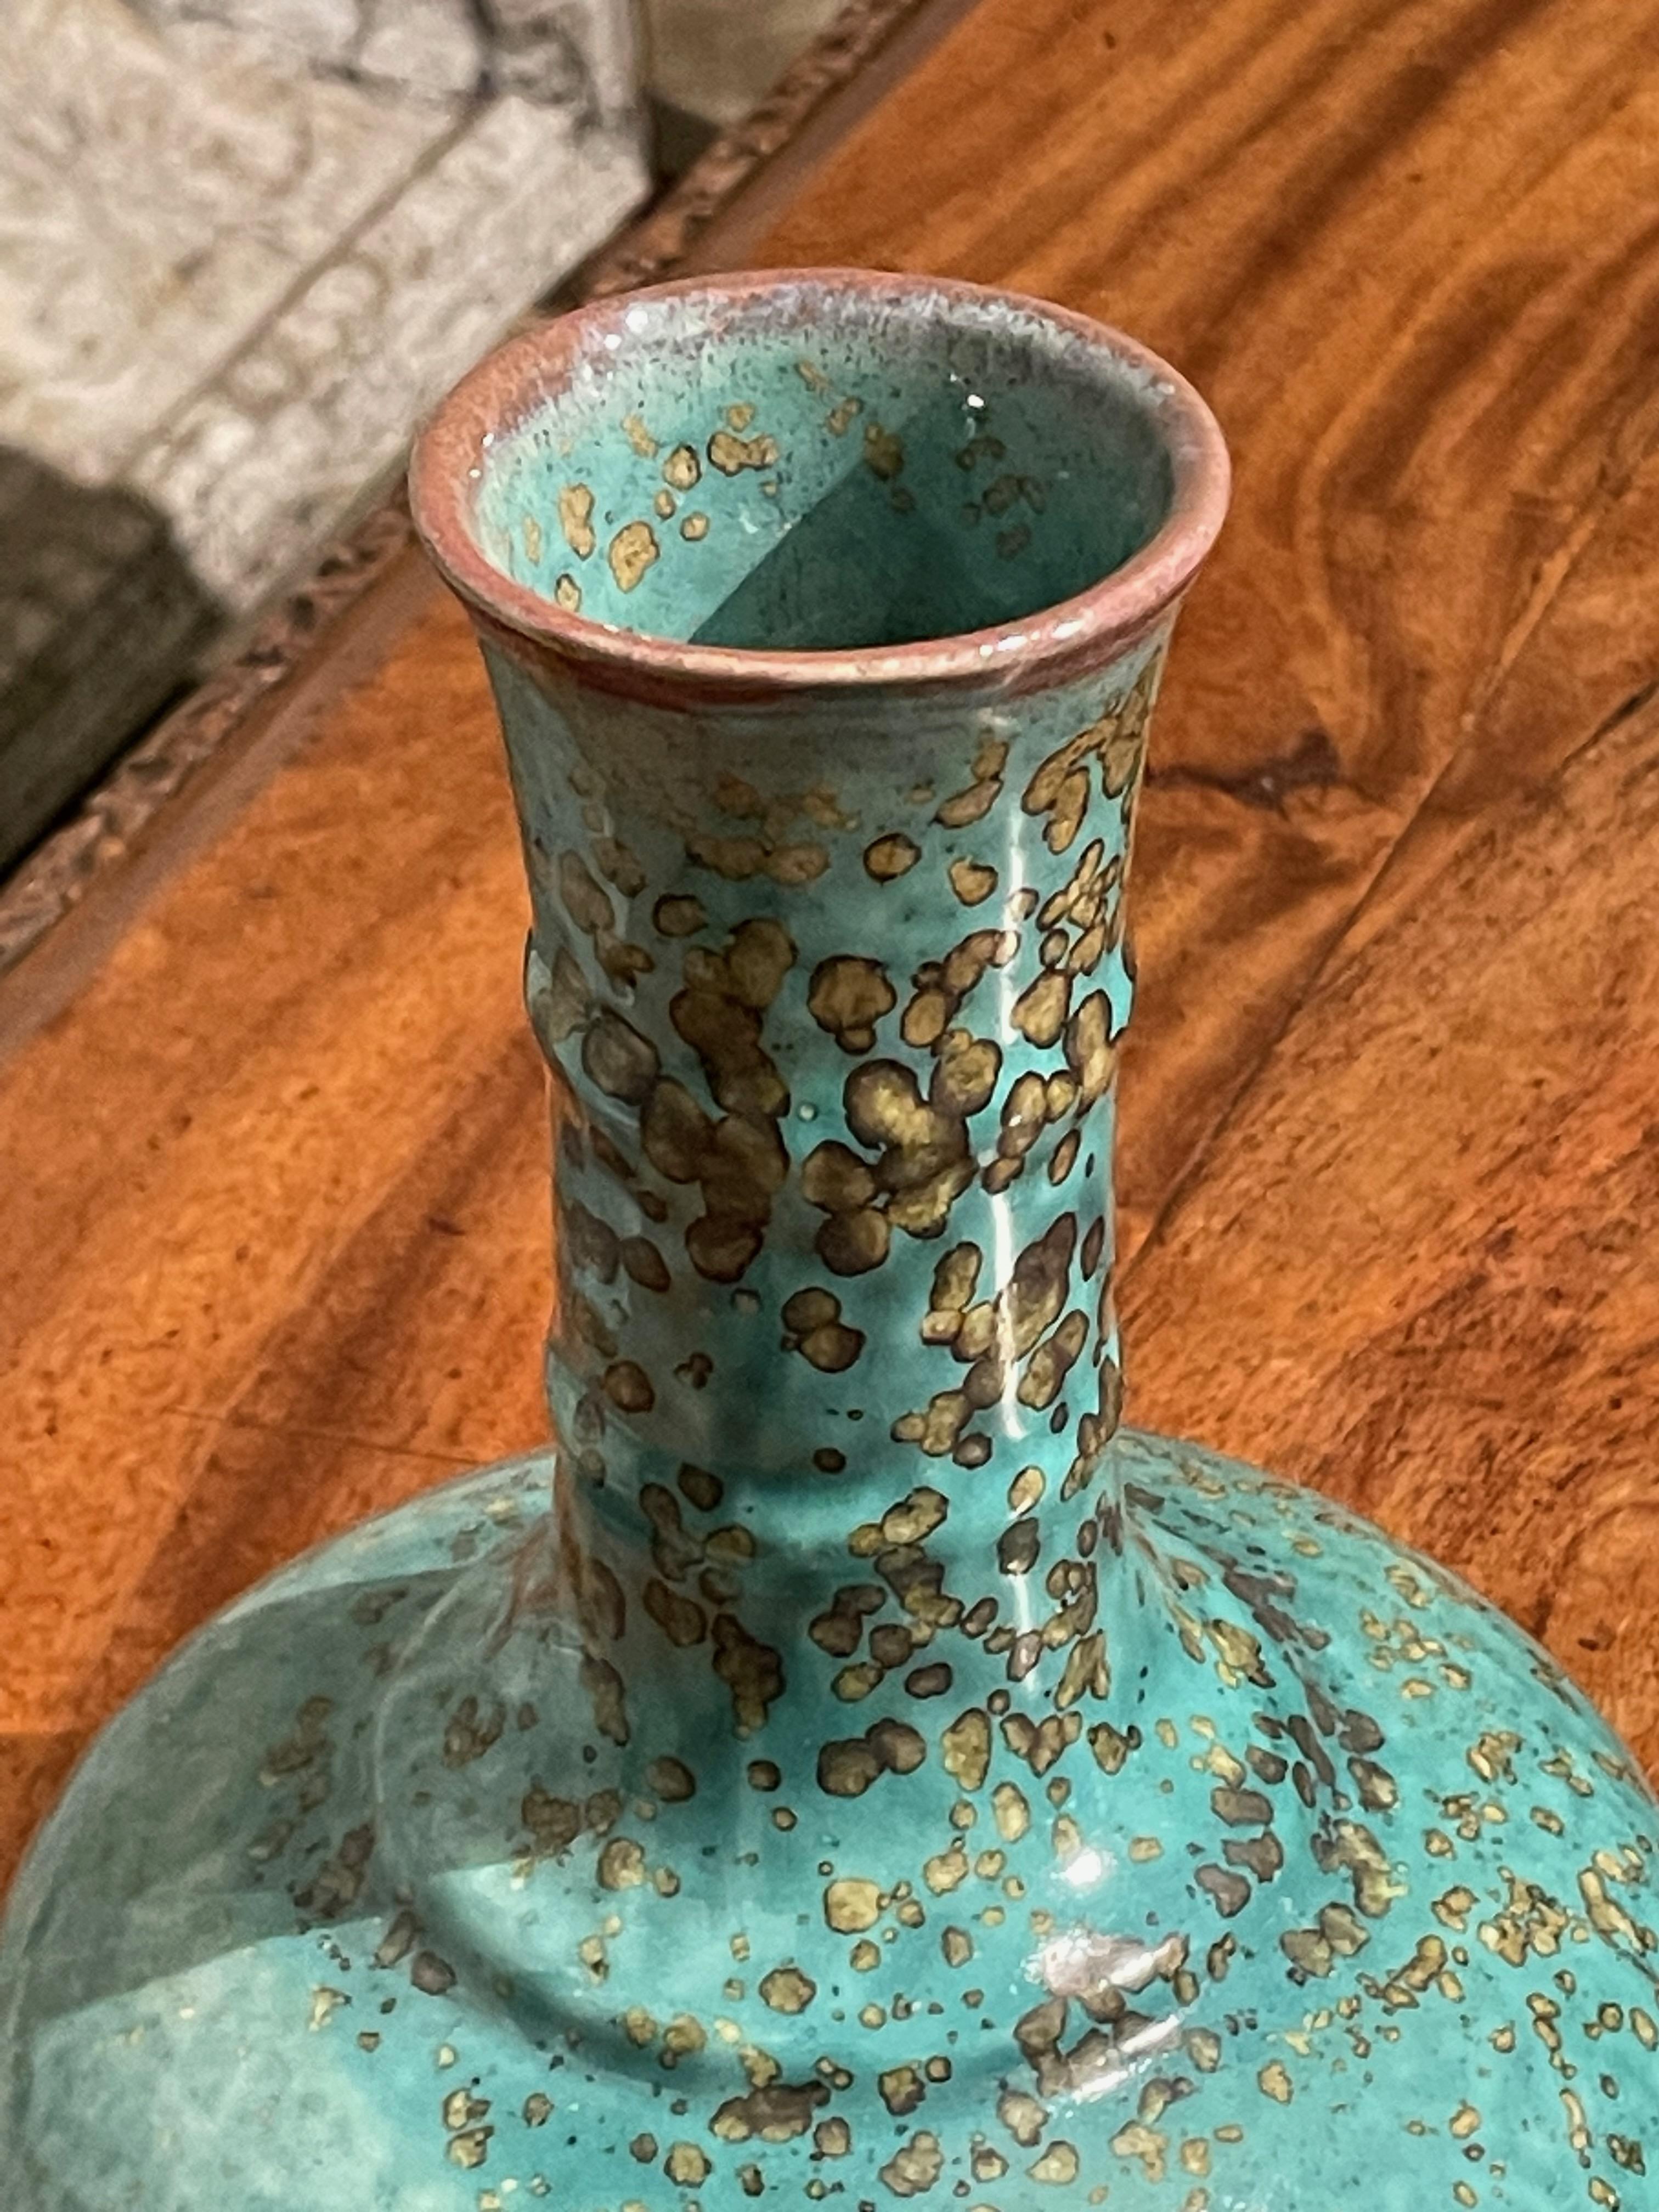 Contemporary Chinese turquoise with gold speckled glaze vase.
Tube neck design.
One of several pieces from a large collection.